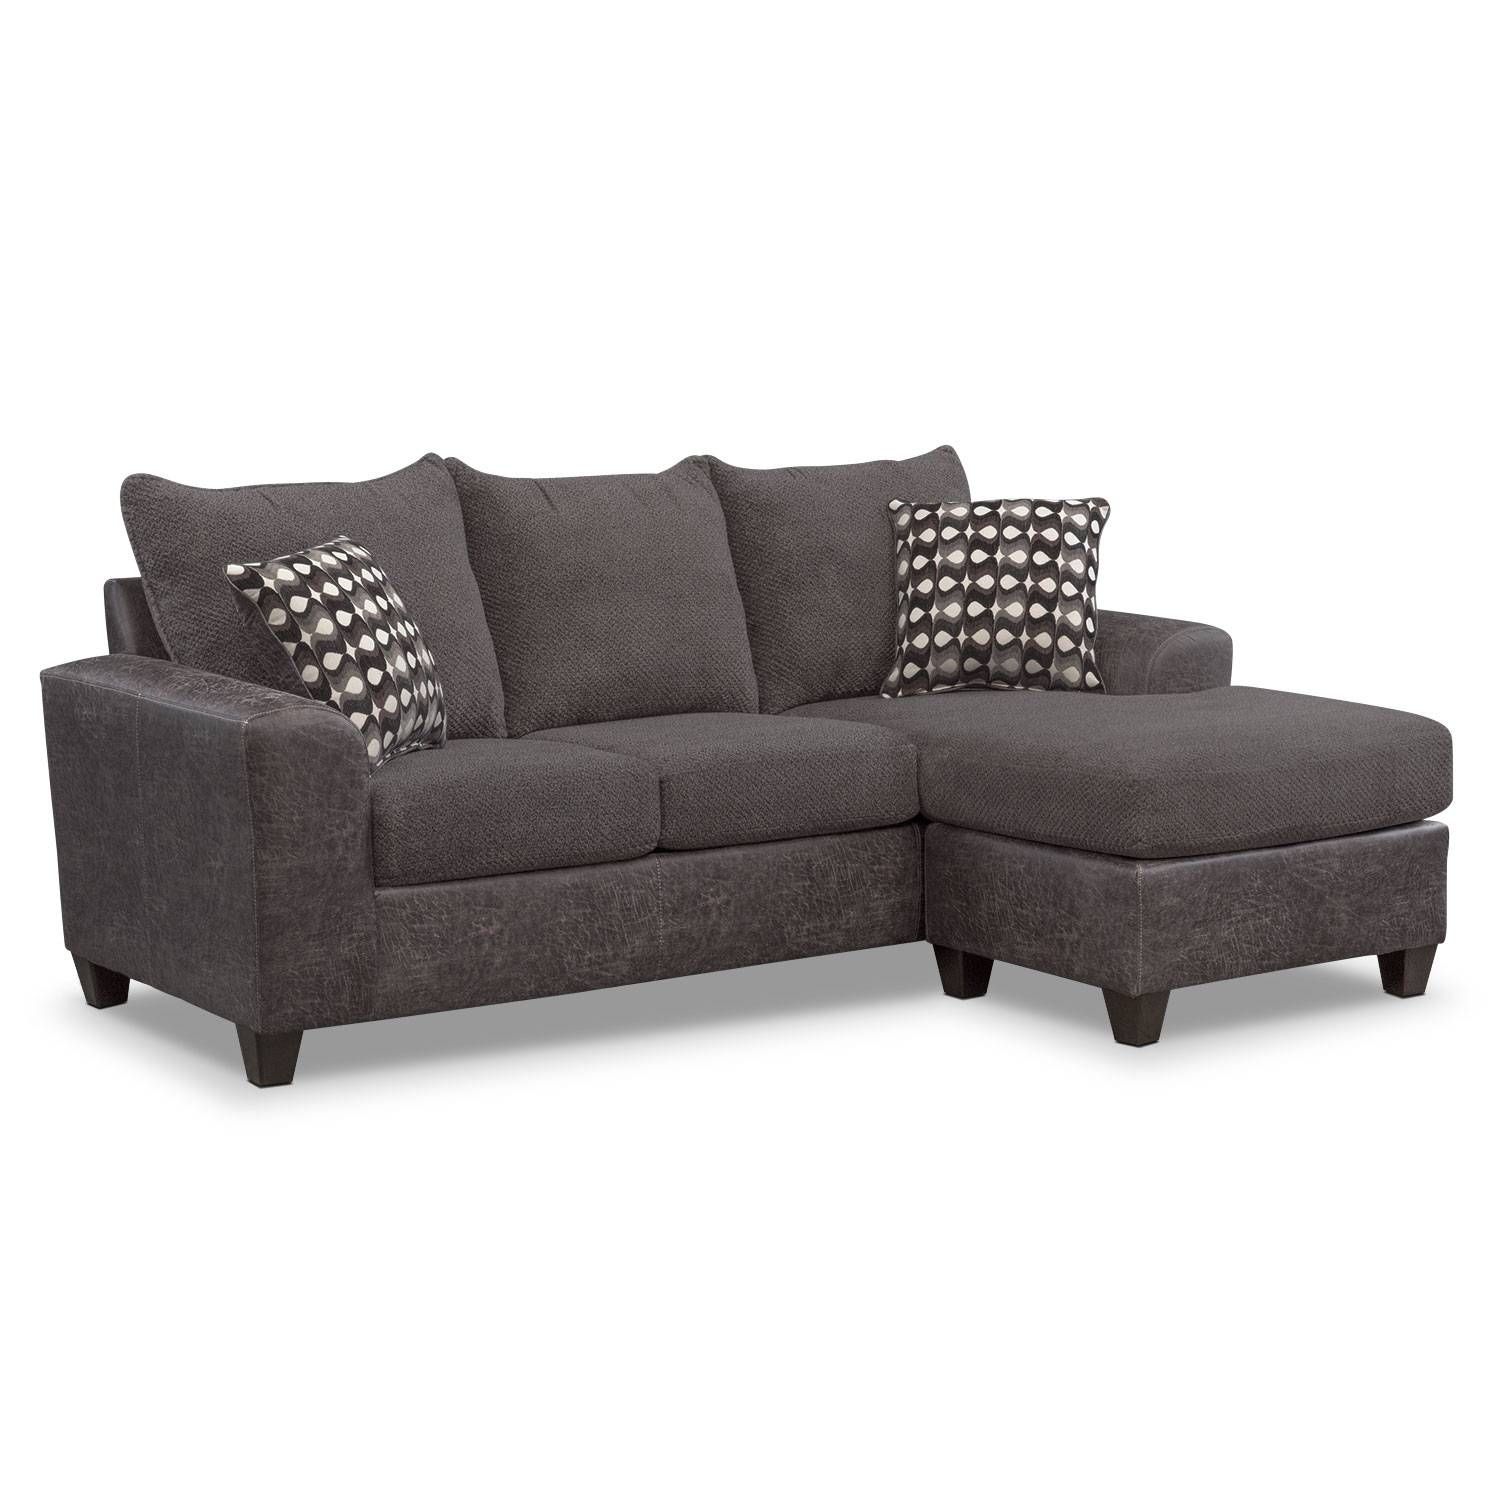 Brando Sofa With Chaise – Smoke | American Signature Furniture Within Gray Sofas (View 13 of 15)